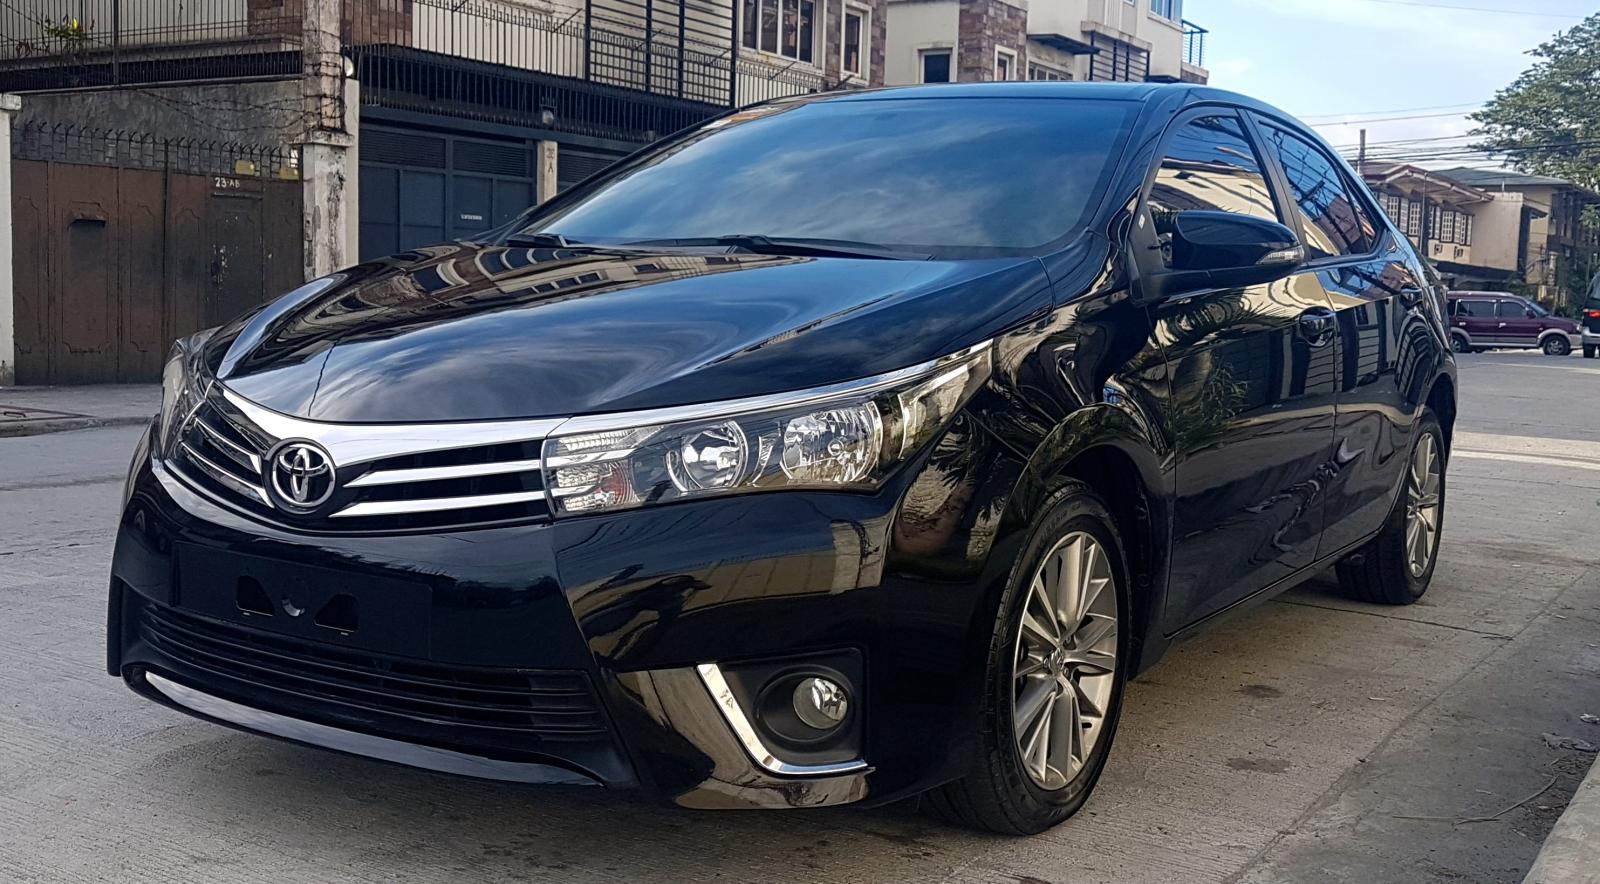 Buy Used Toyota Corolla Altis 2016 for sale only ₱590000 - ID602126